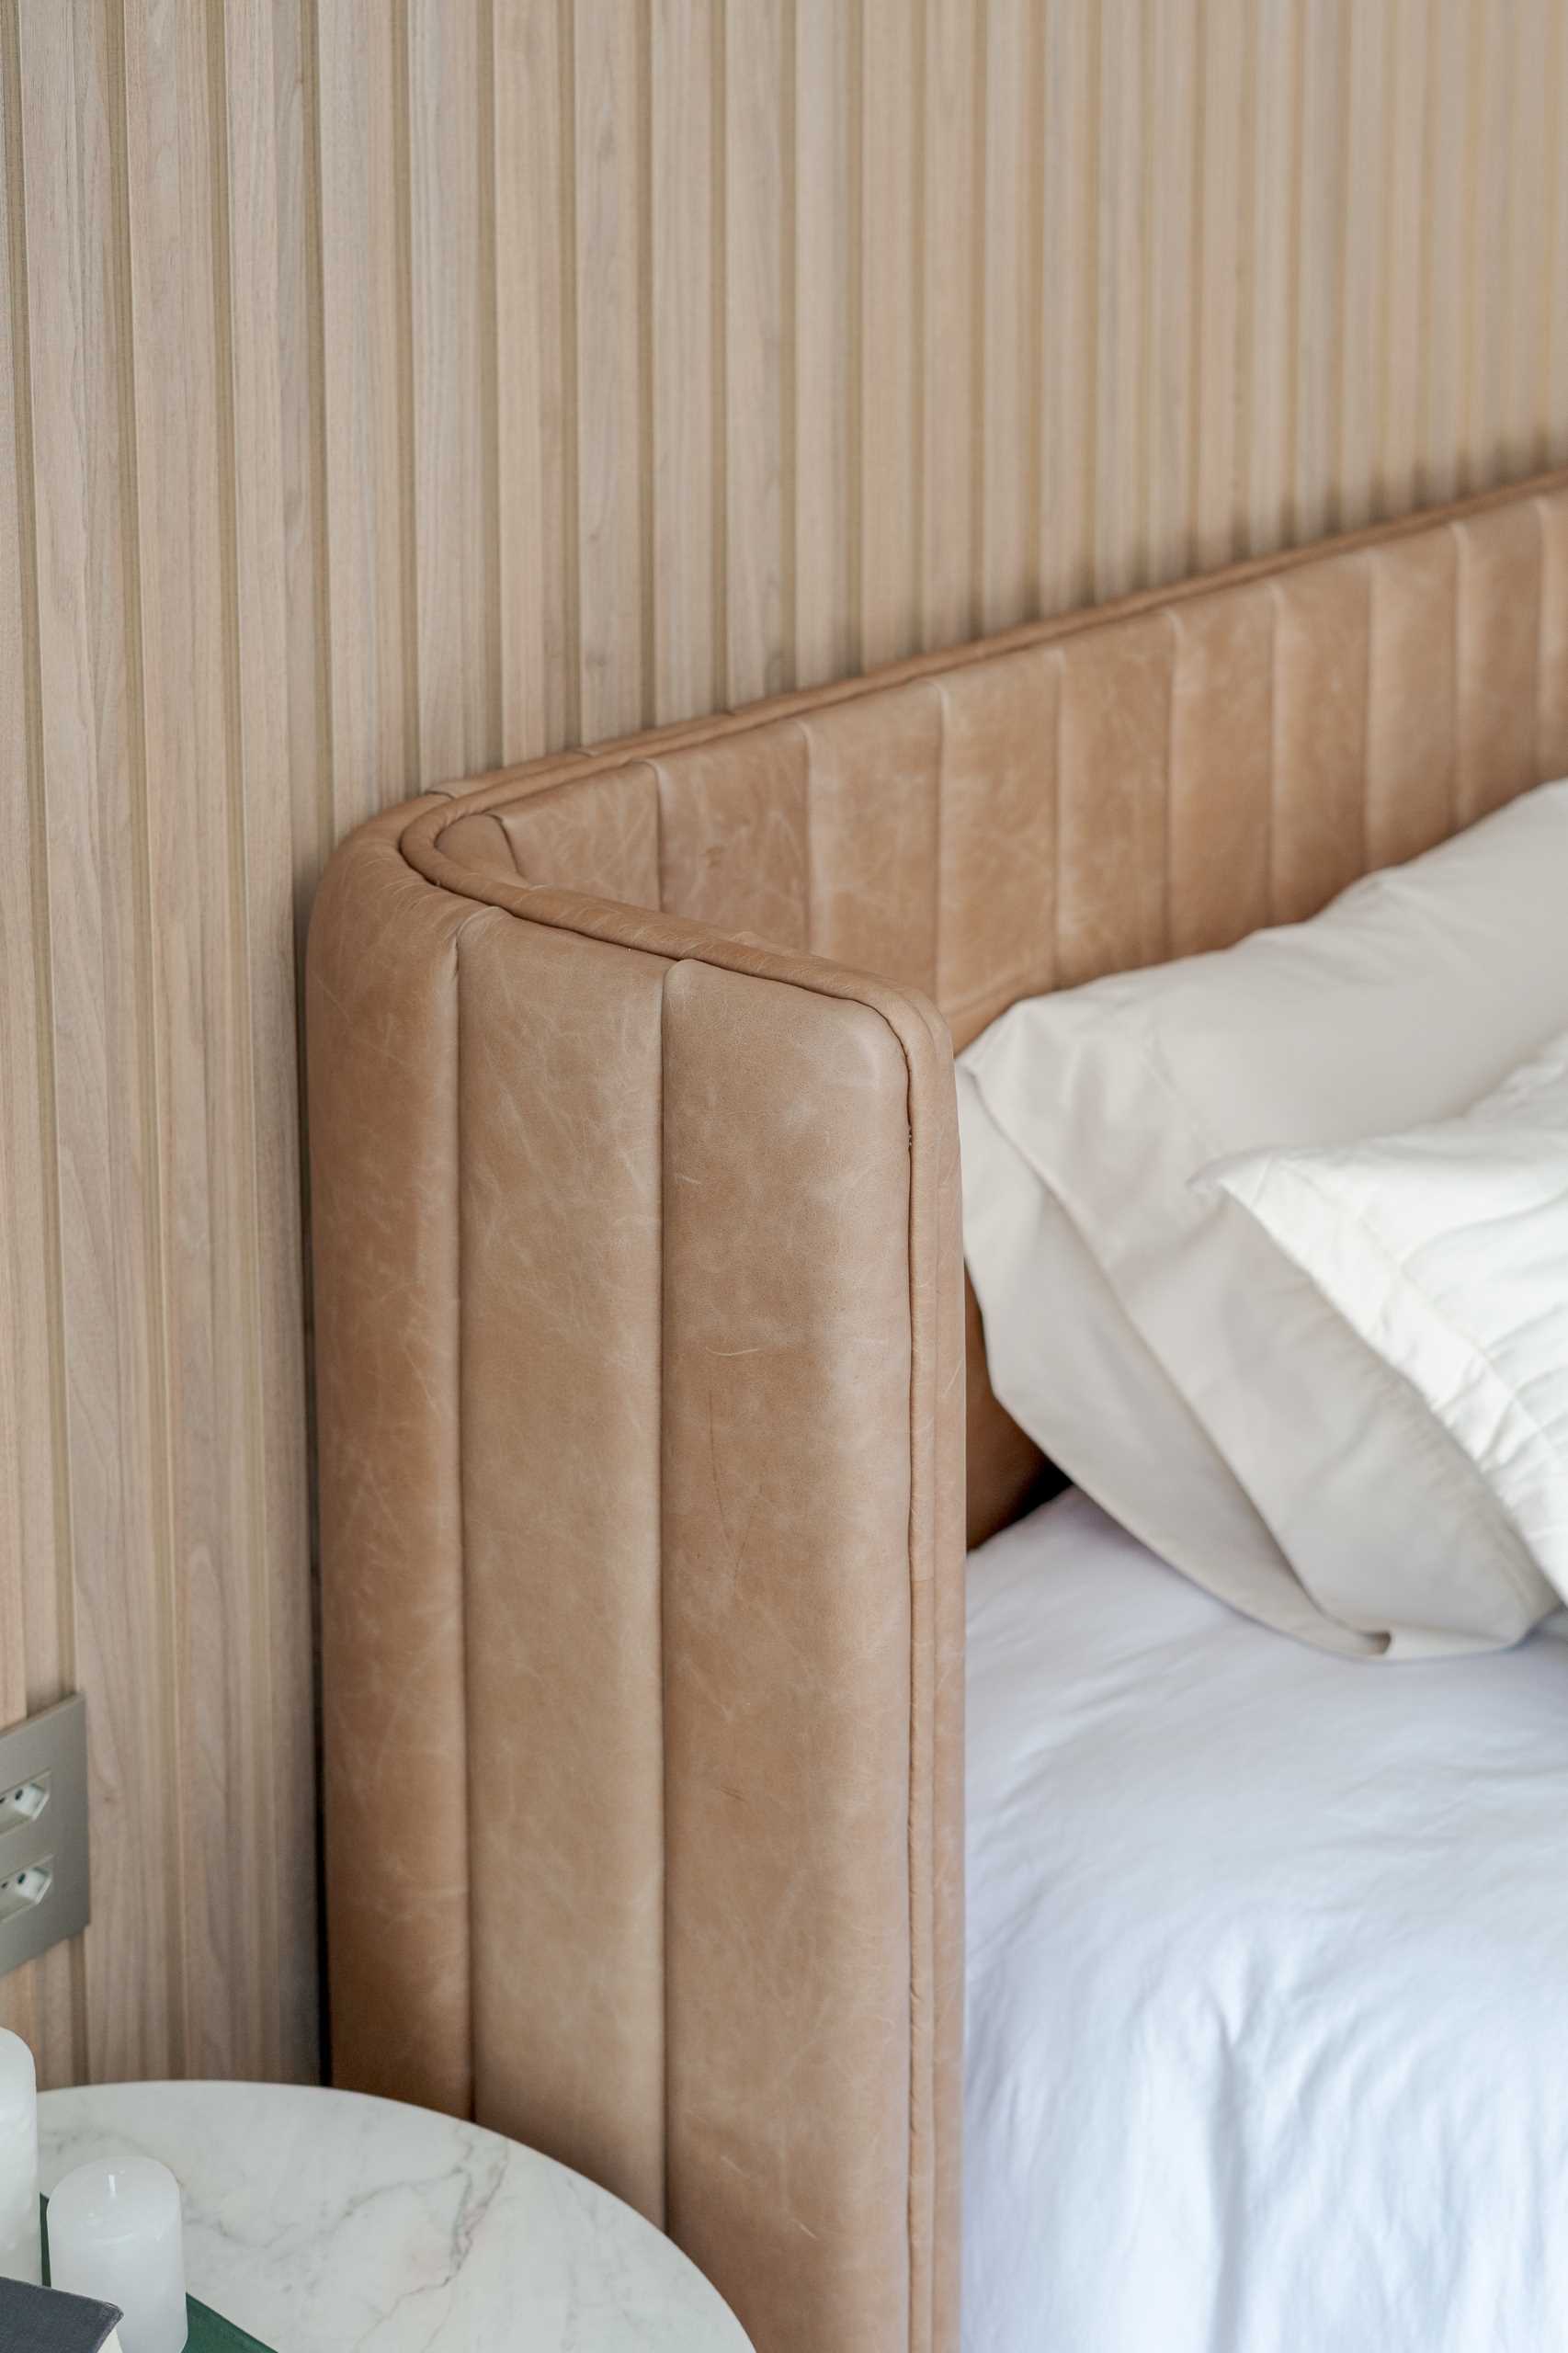 In this modern primary bedroom, vertical wood strips line the wall, while the bed has a curved padded headboard.